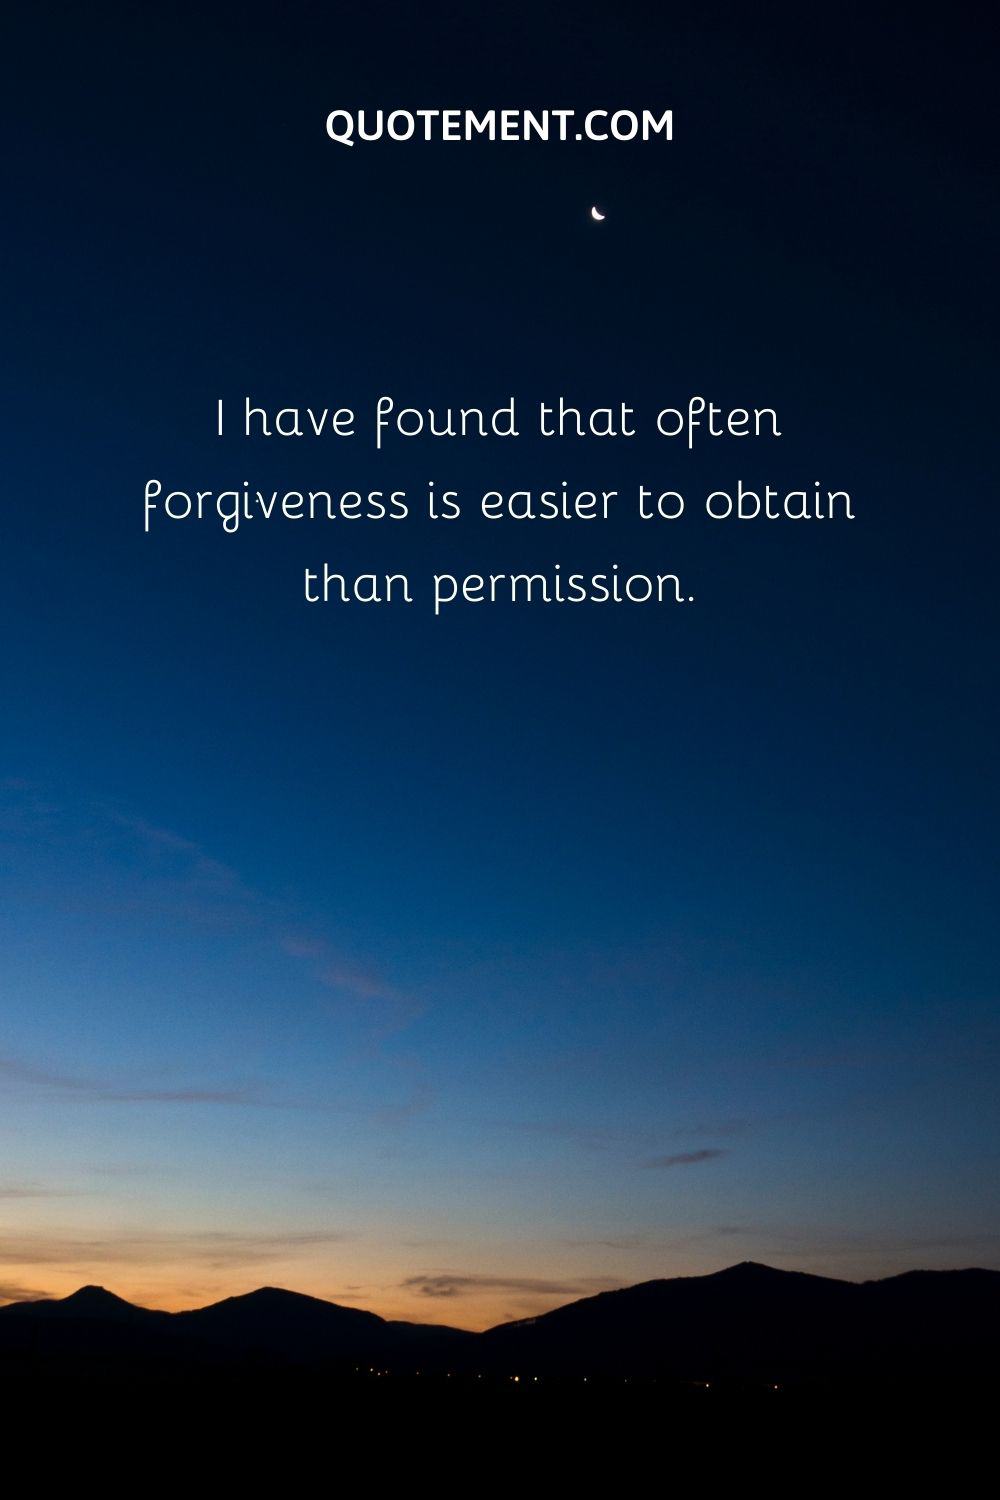 I have found that often forgiveness is easier to obtain than permission